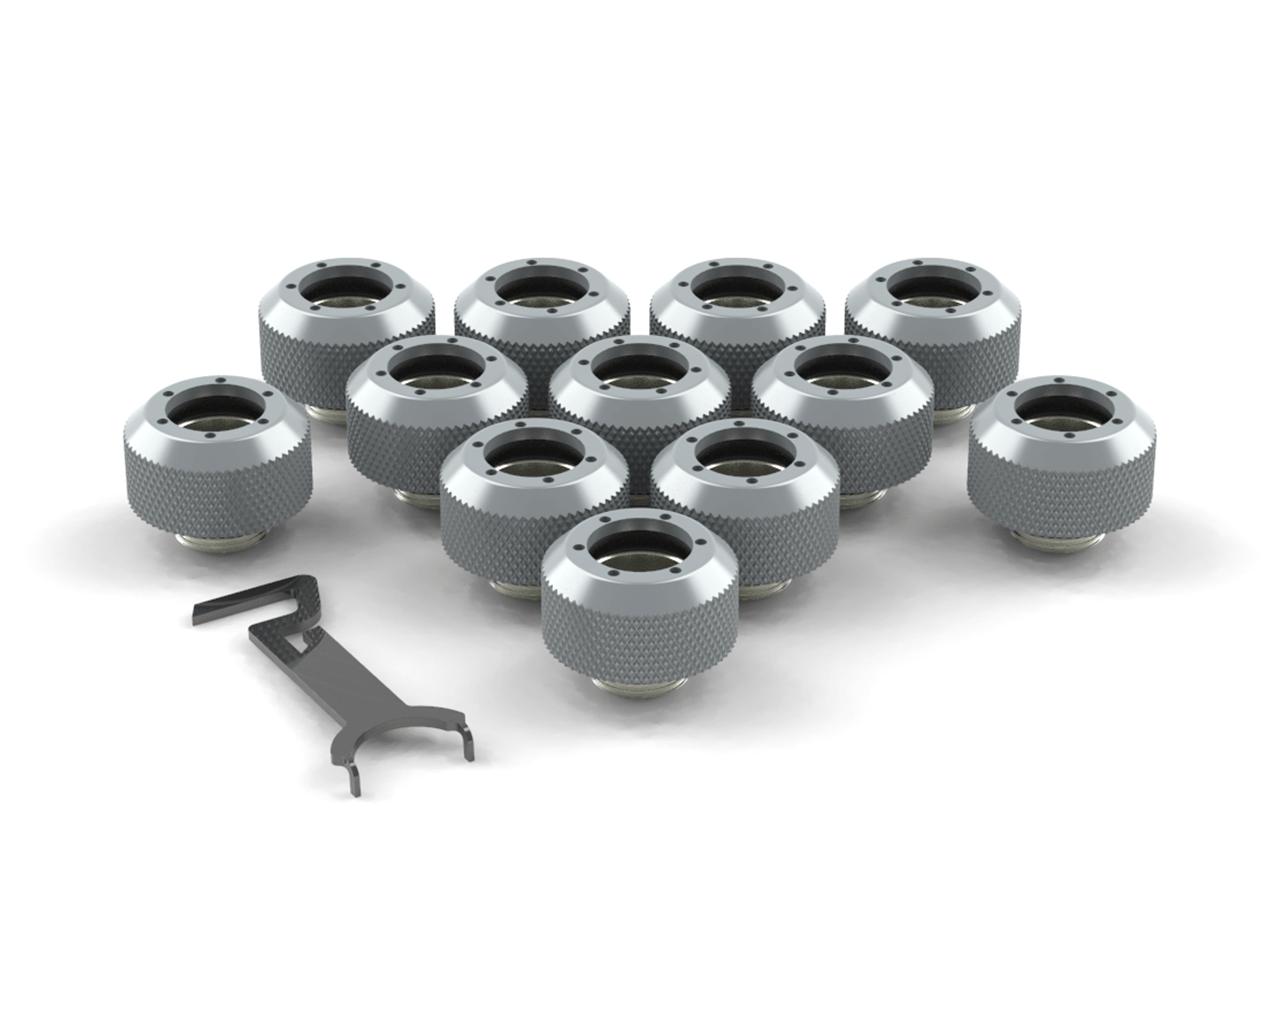 PrimoChill 1/2in. Rigid RevolverSX Series Fitting - 12 pack - PrimoChill - KEEPING IT COOL Silver